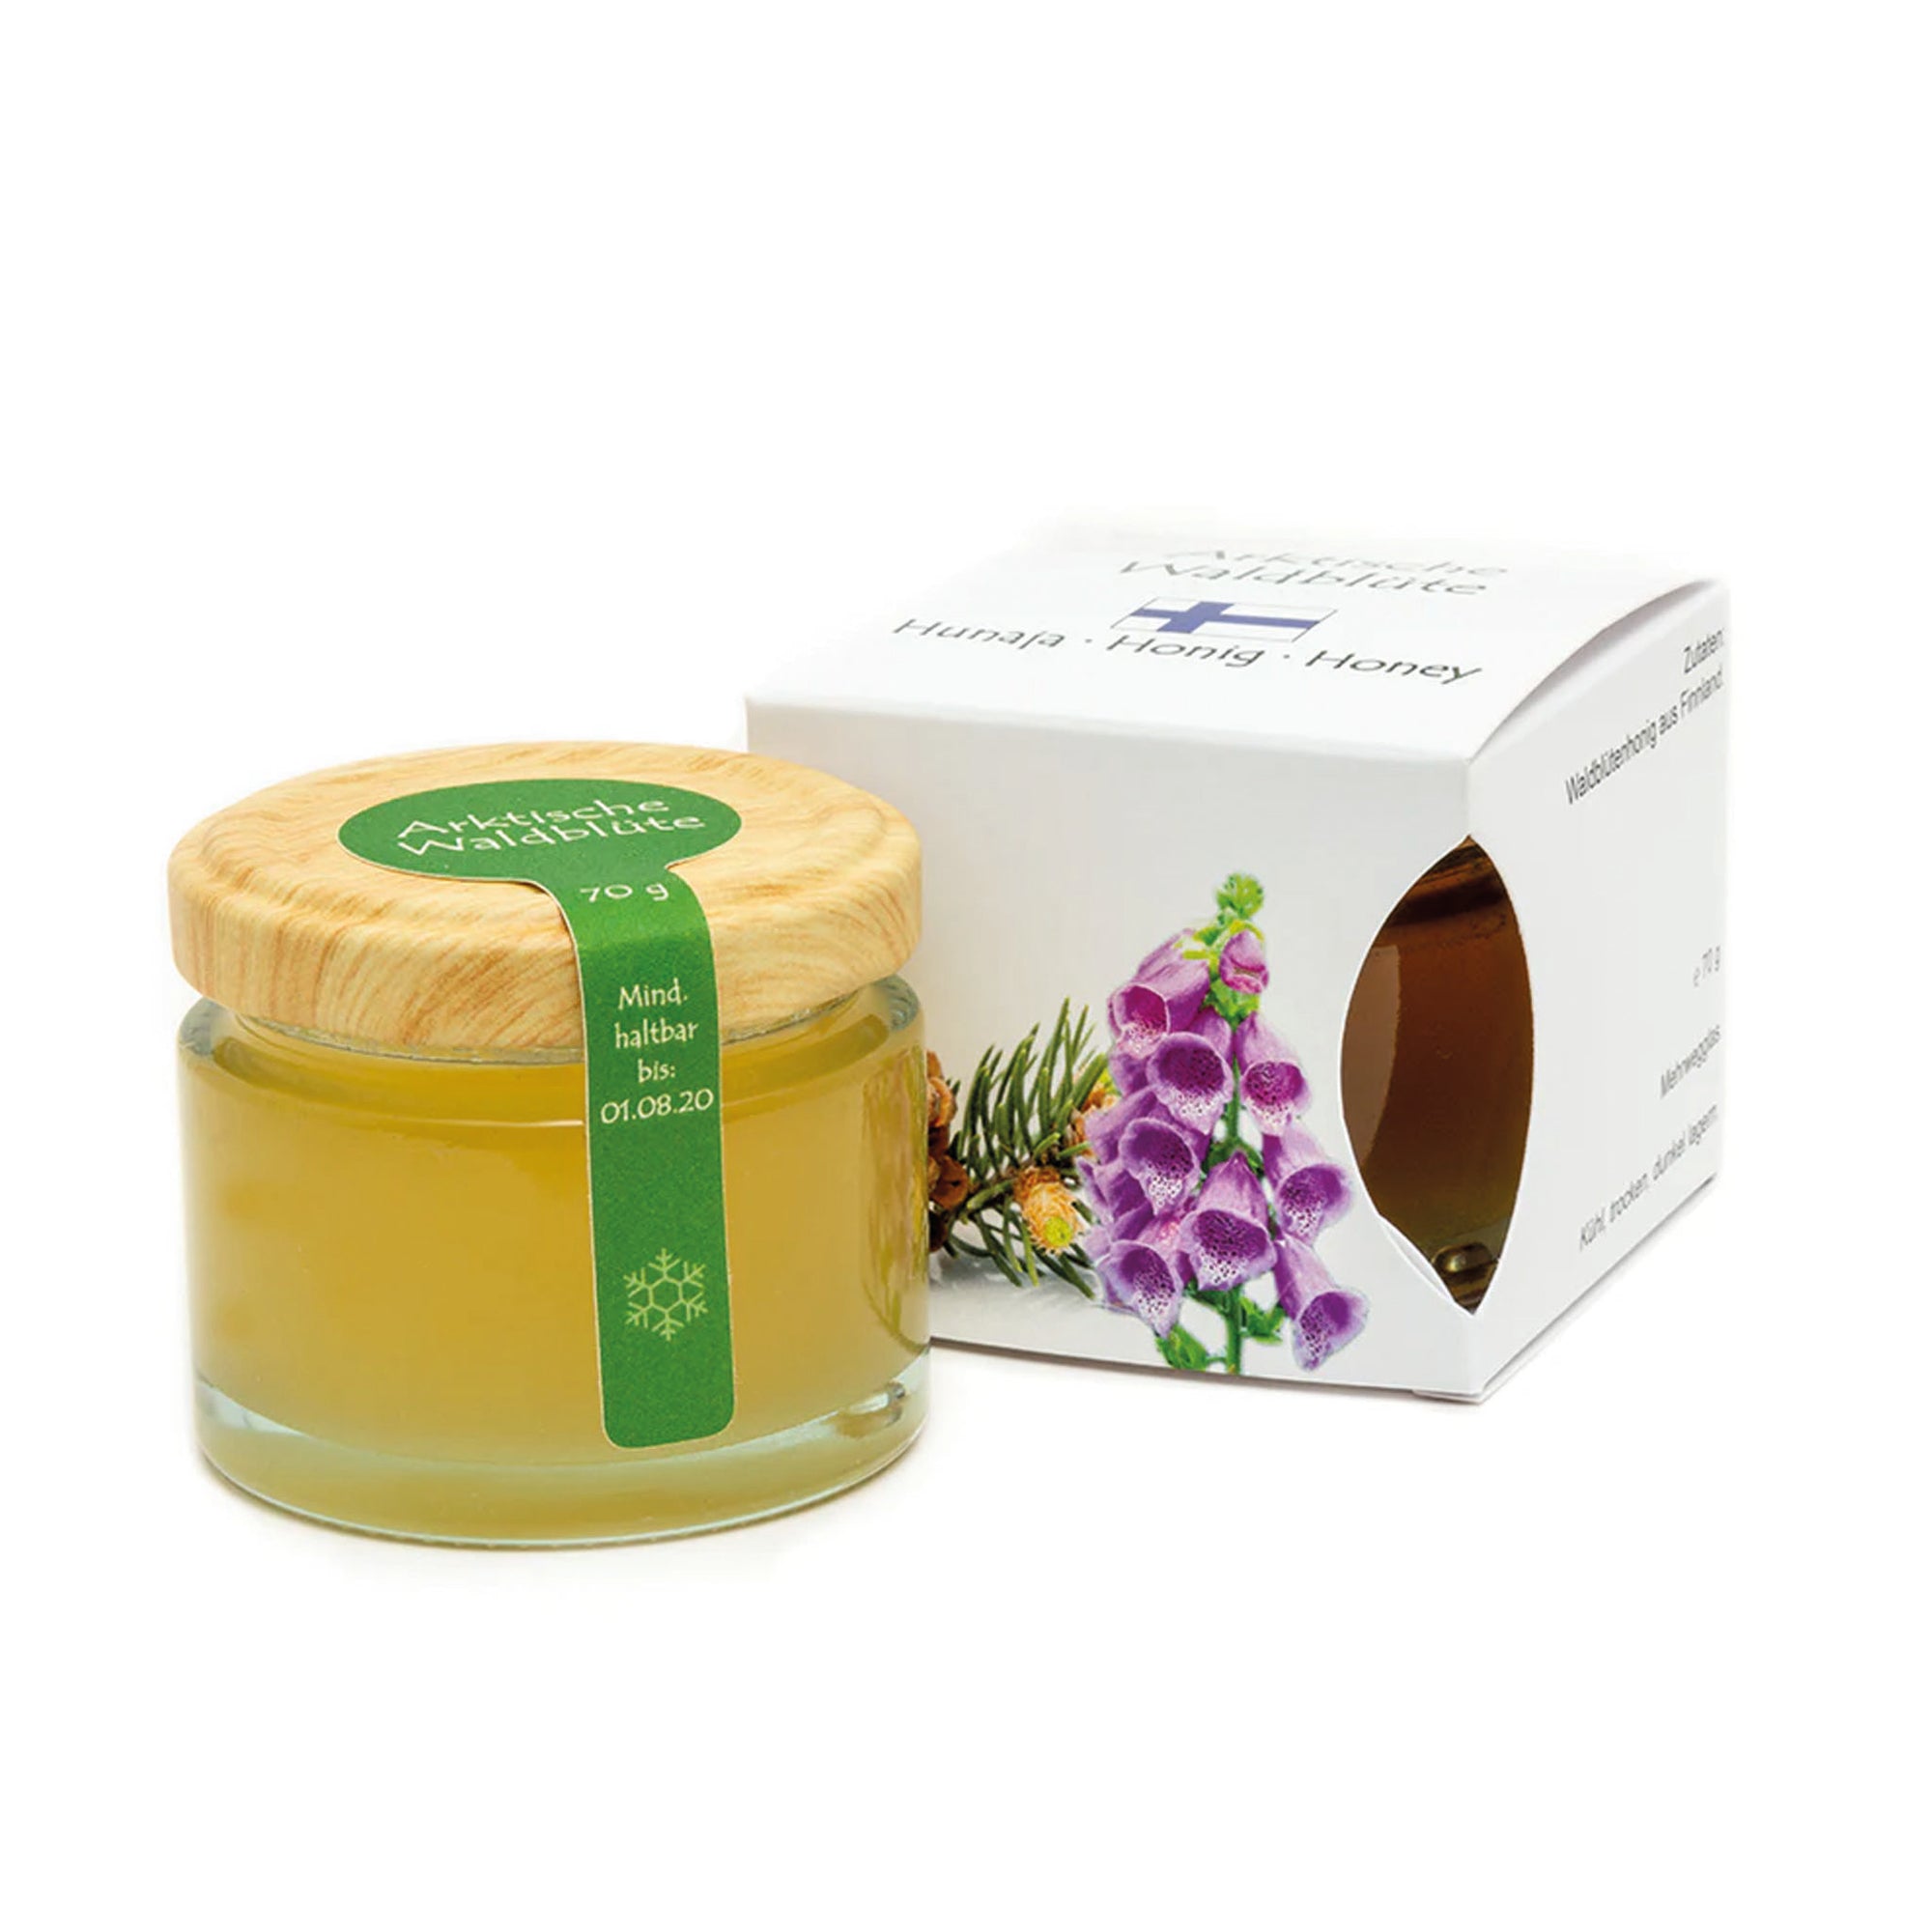 Arctic forest blossom honey from Oulu